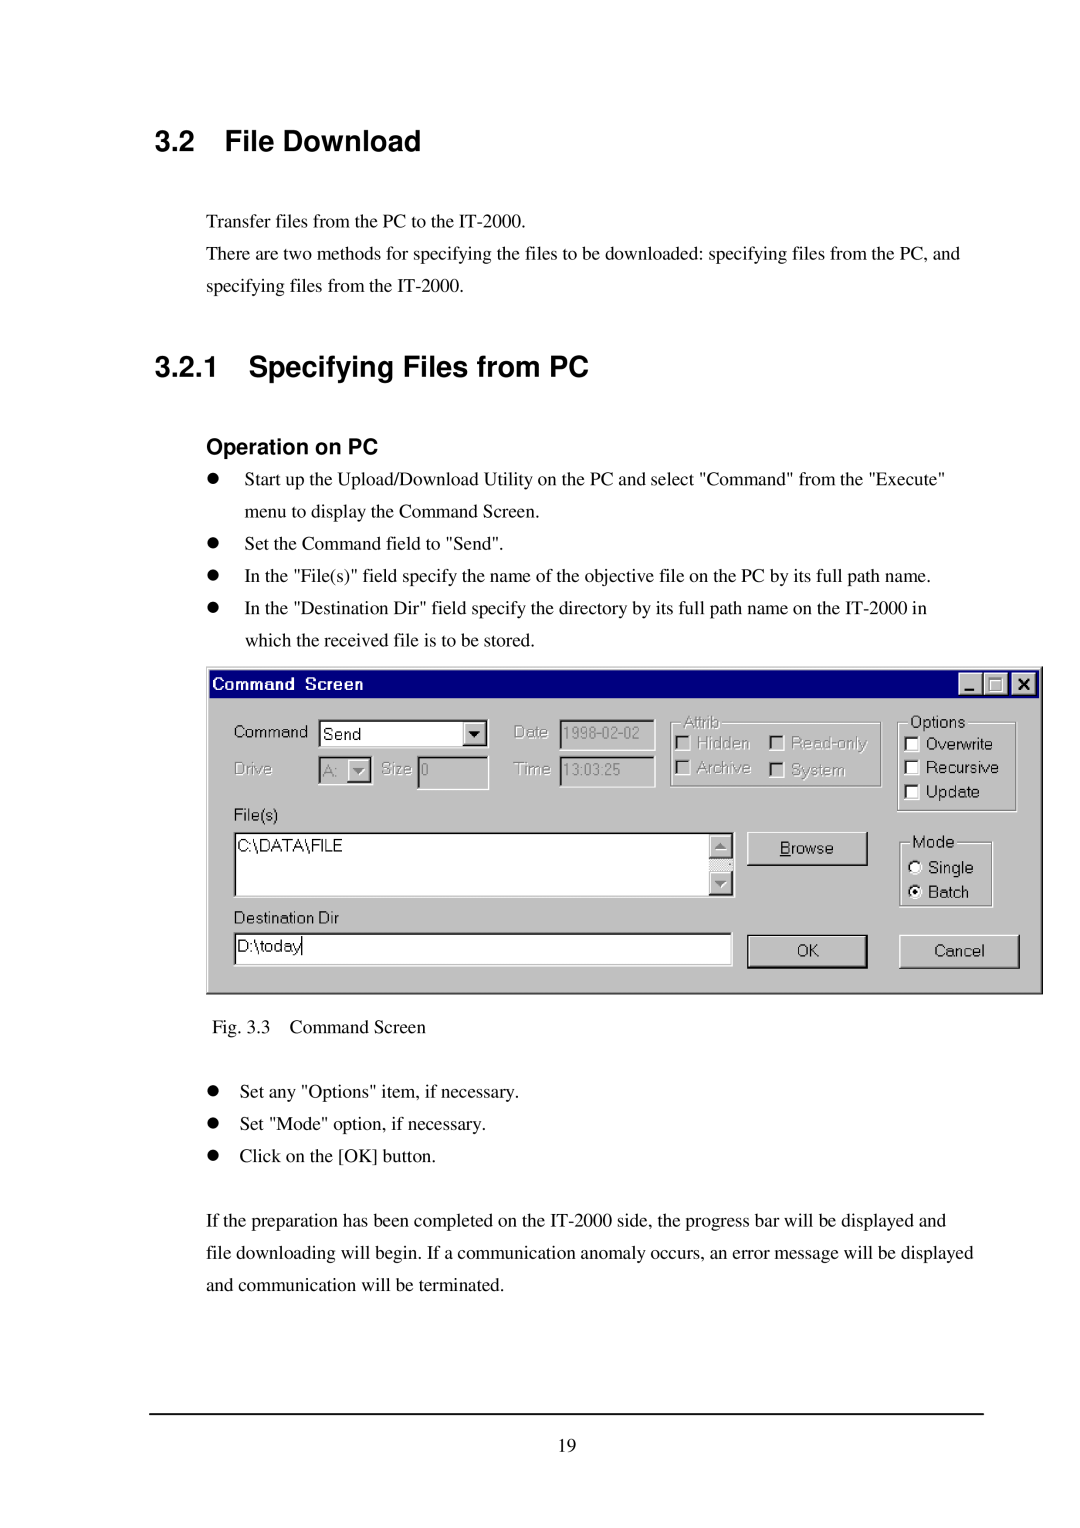 Casio IT-2000 installation manual File Download, Specifying Files from PC, Operation on PC 